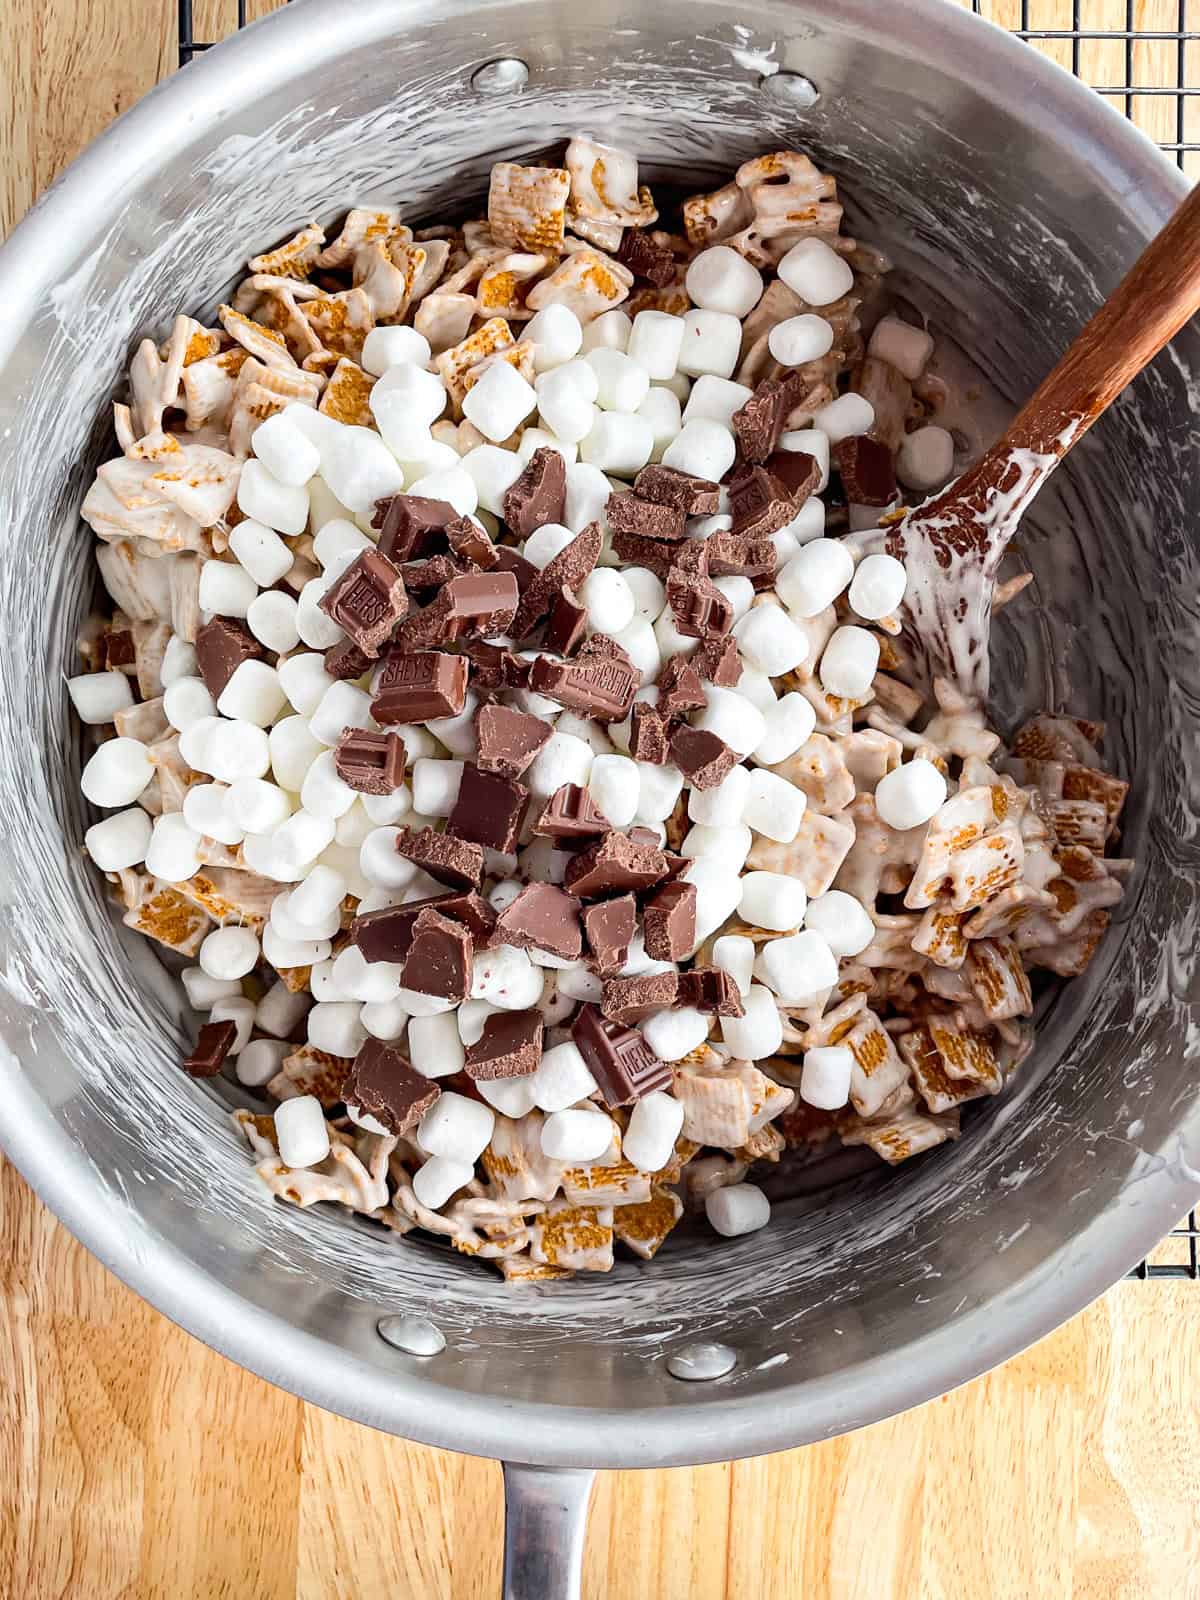 Adding mini marshmallows and chopped chocolate to the cereal mixture.